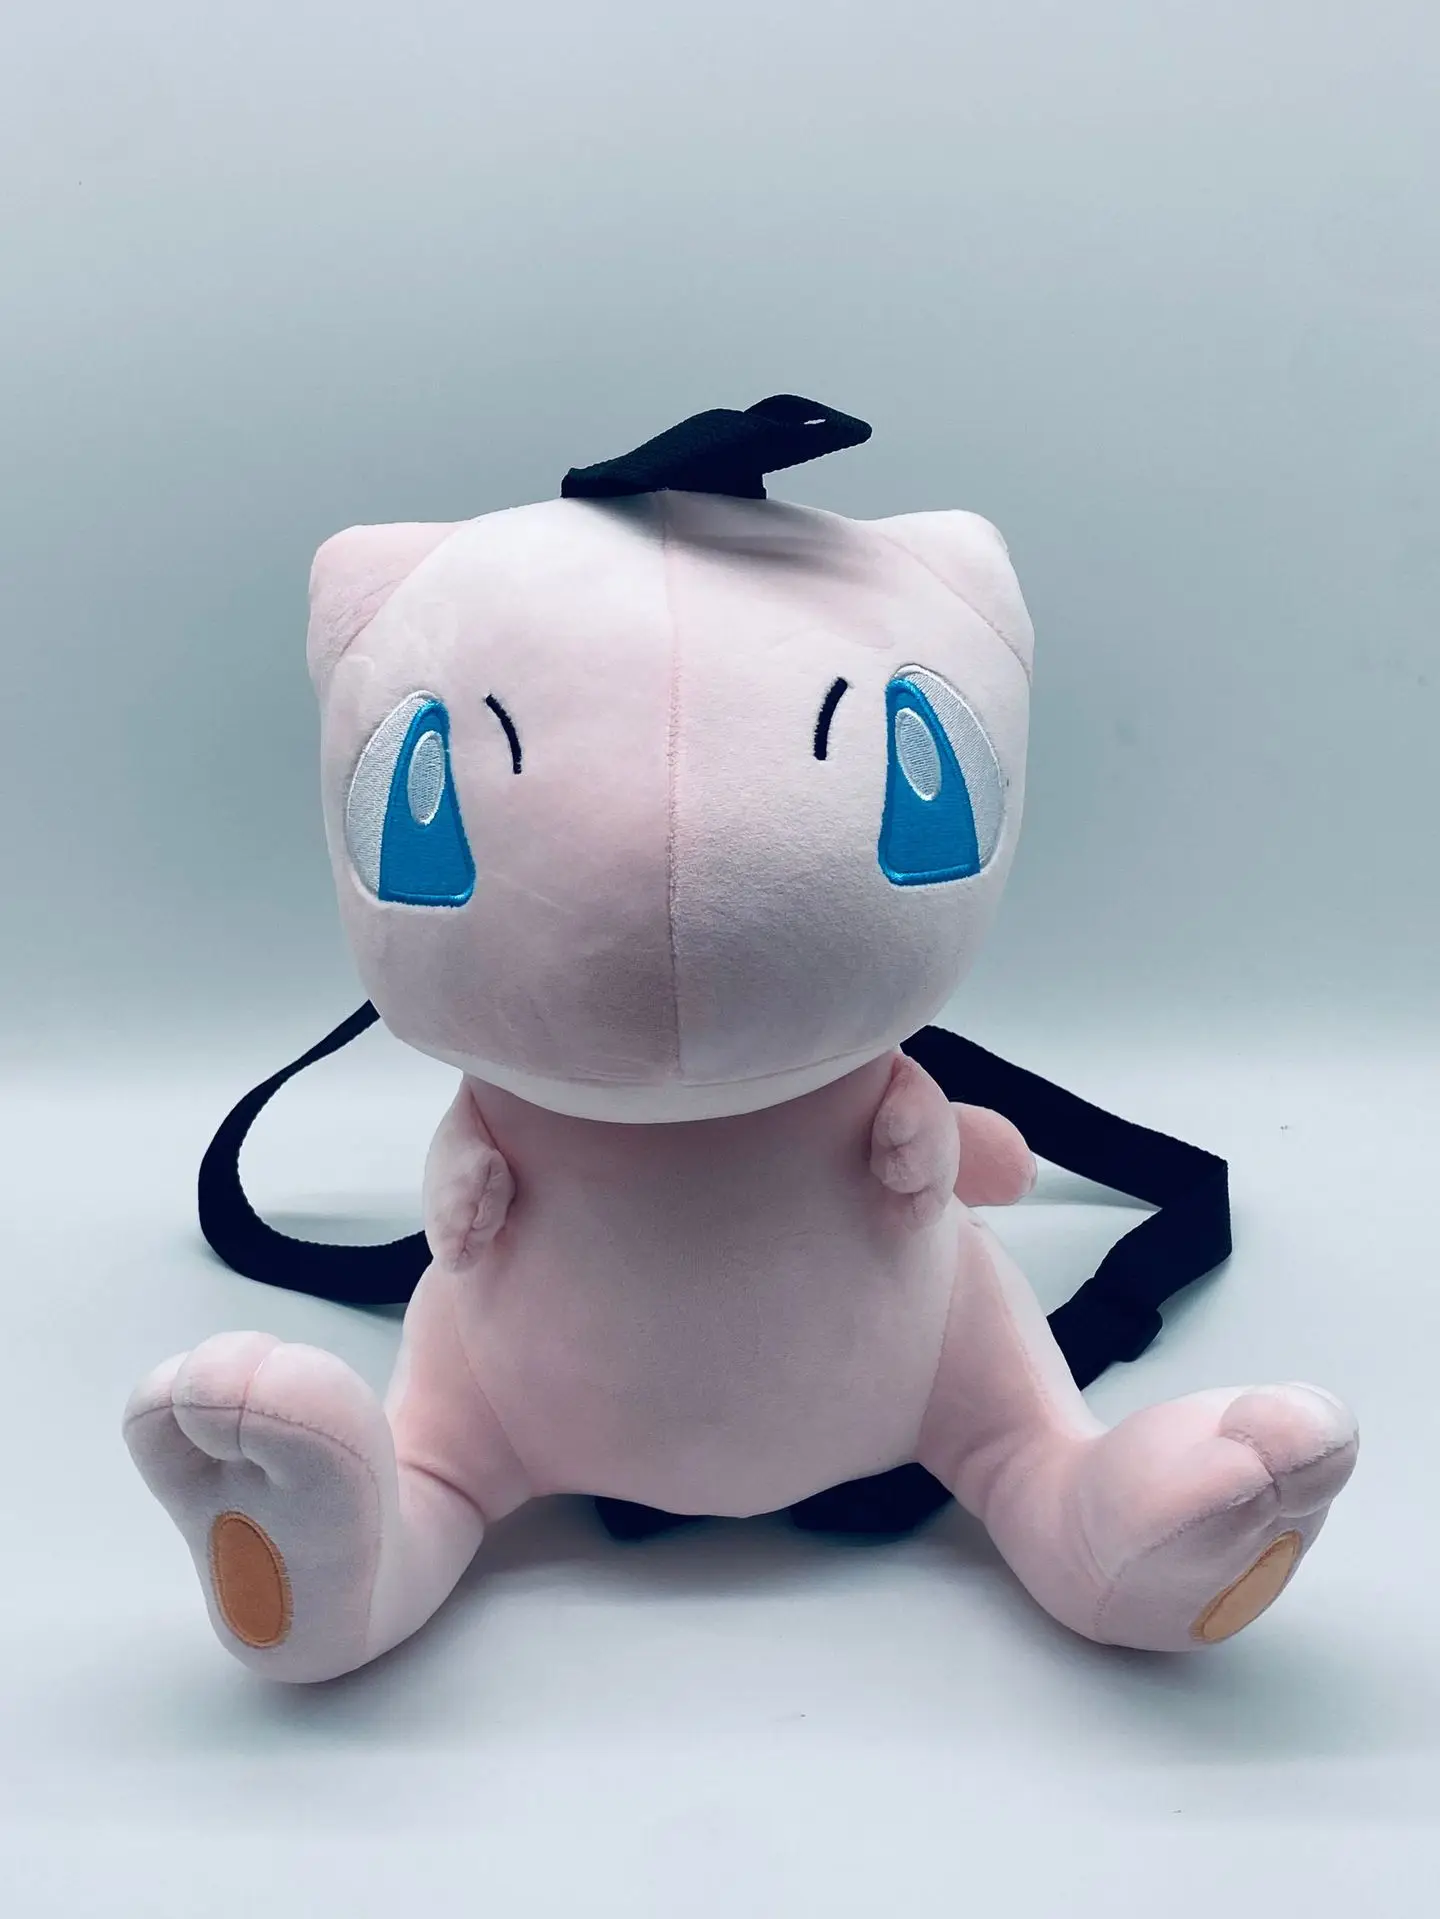 2023 New Snorlax Eevee Plush Knapsack Doll Mewtwo Shoulder Bag Gengar Plush Backpack Toy for Gifts